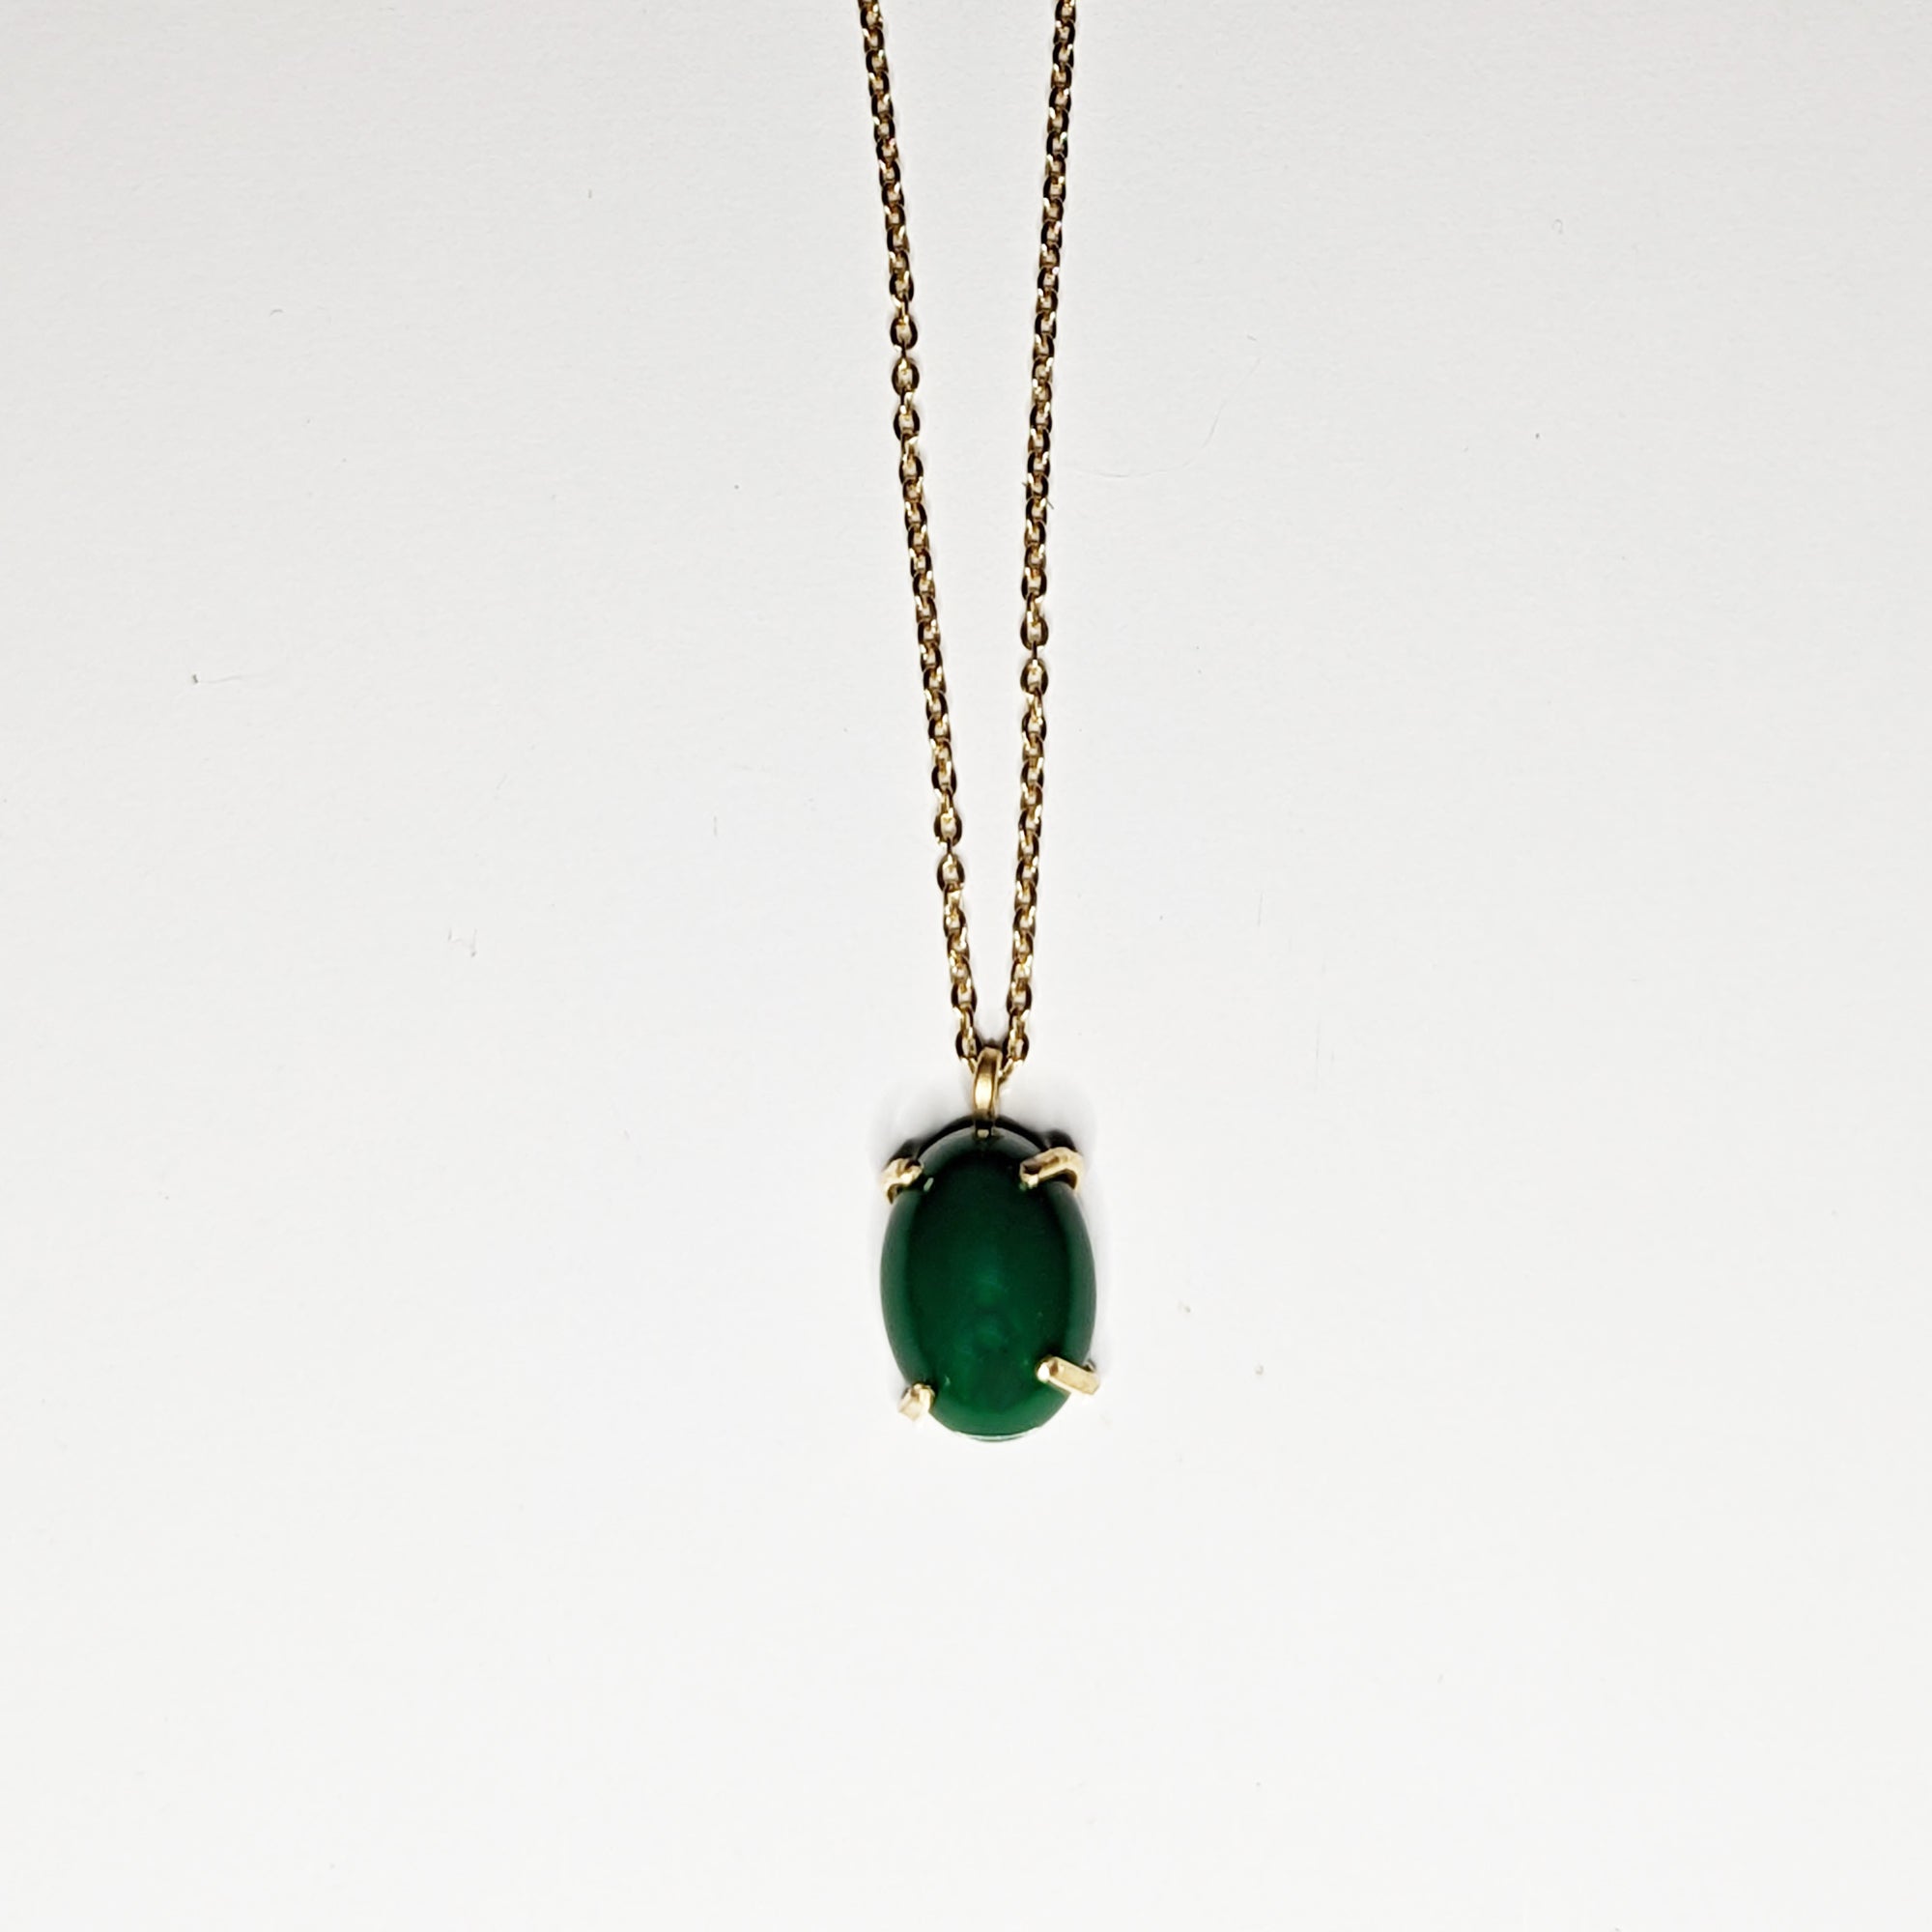 The Green Jewel Necklace